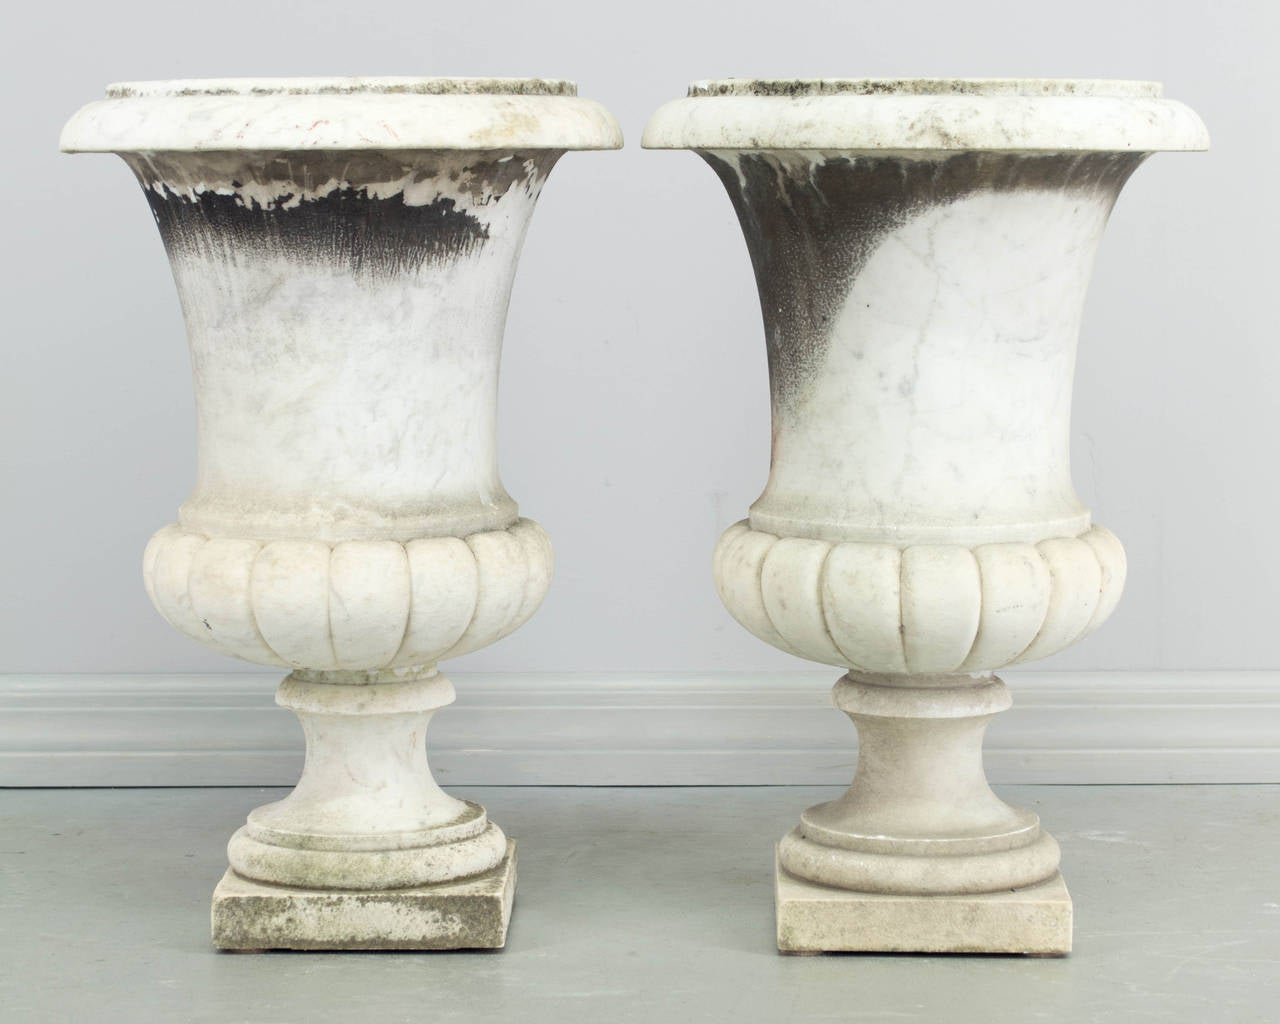 Pair of 19th century French urns, made of white marble with grey veining and retaining old weathered surface. In two parts, the planters rest on the pedestal base. The base of the pedestal is is 6.75